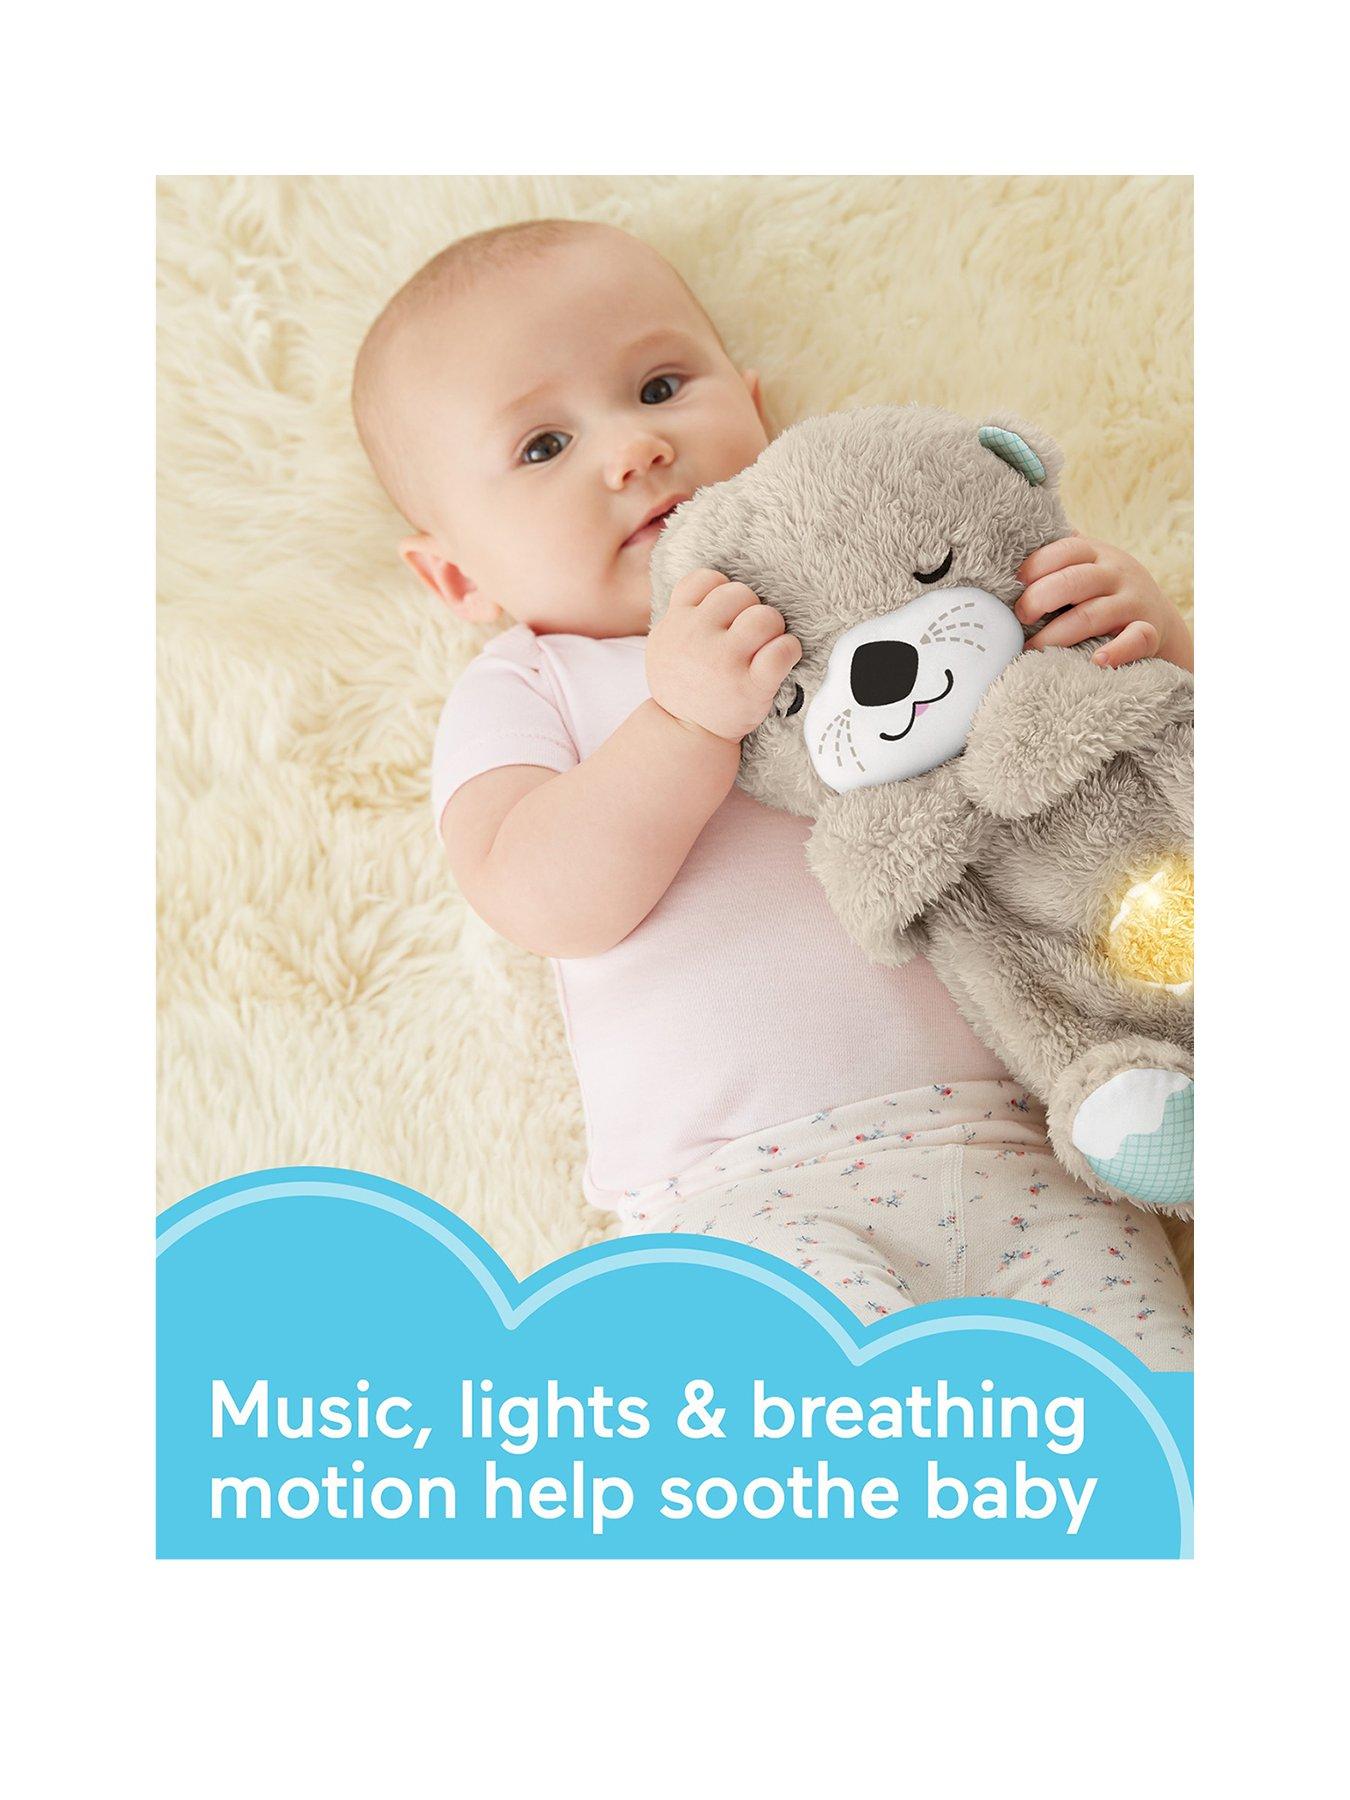 Soothe 'n Snuggle Otter Plush Baby Toy with 11 Sensory Features